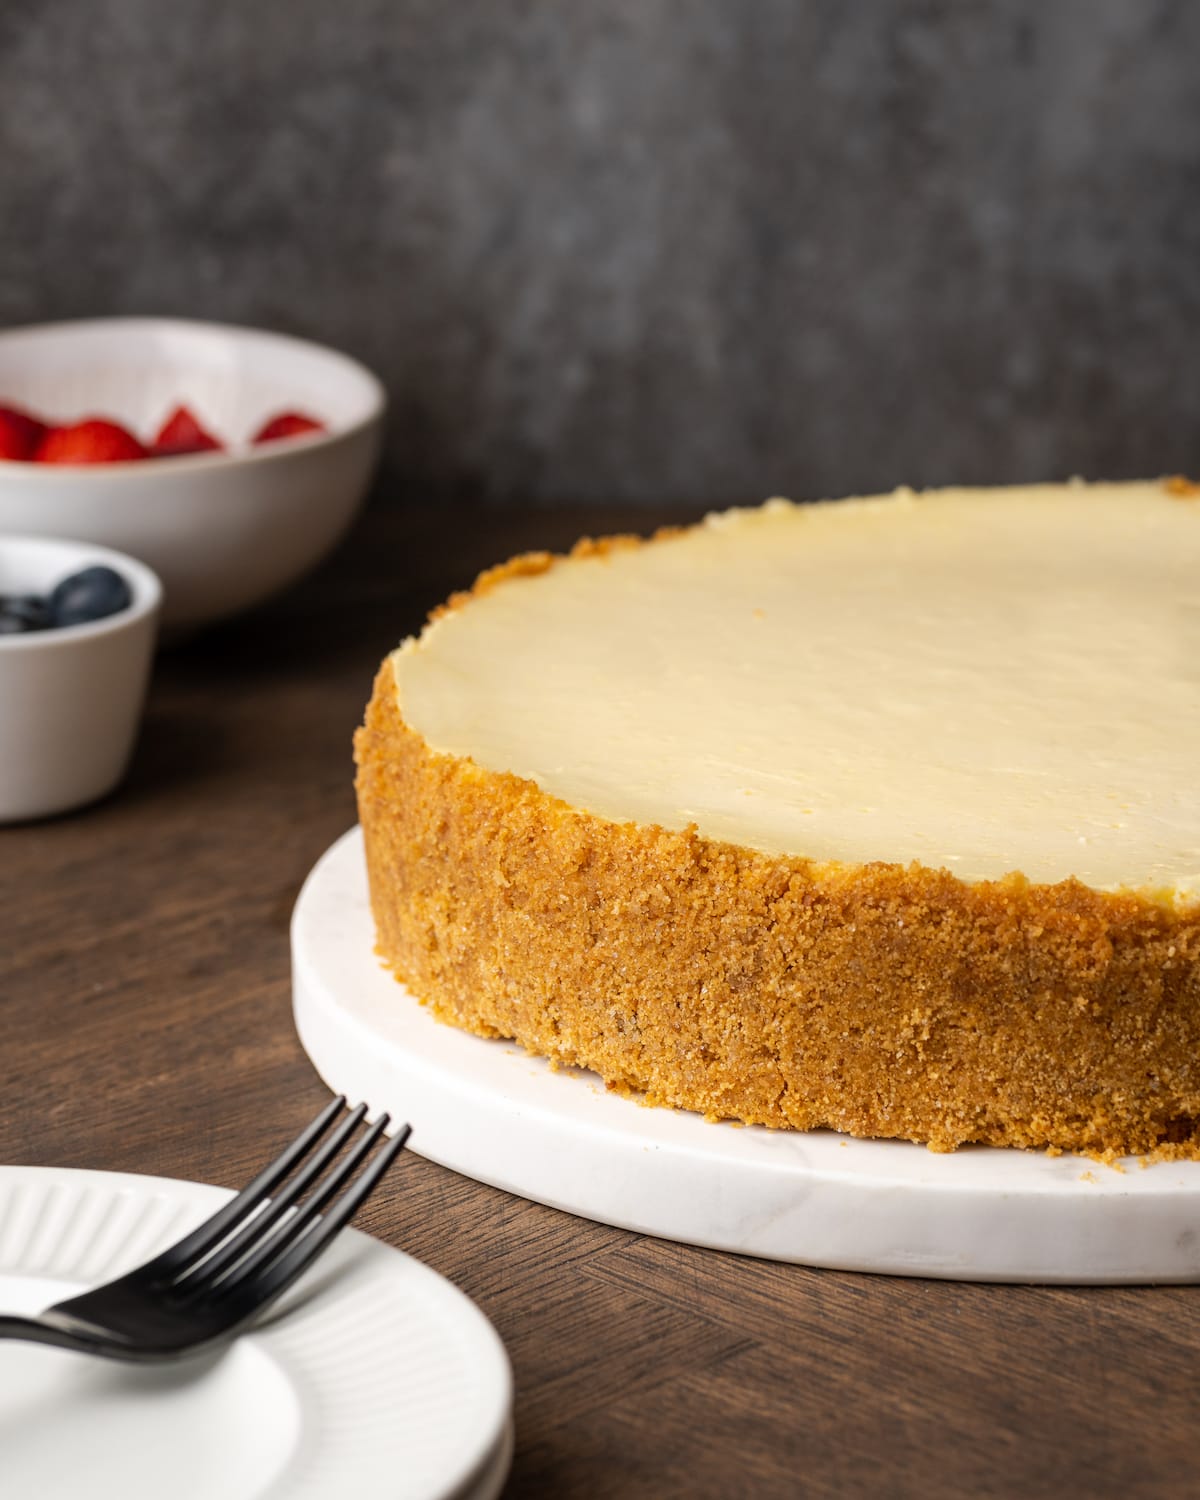 A whole sour cream cheesecake on a white plate, next to a plate with a fork.